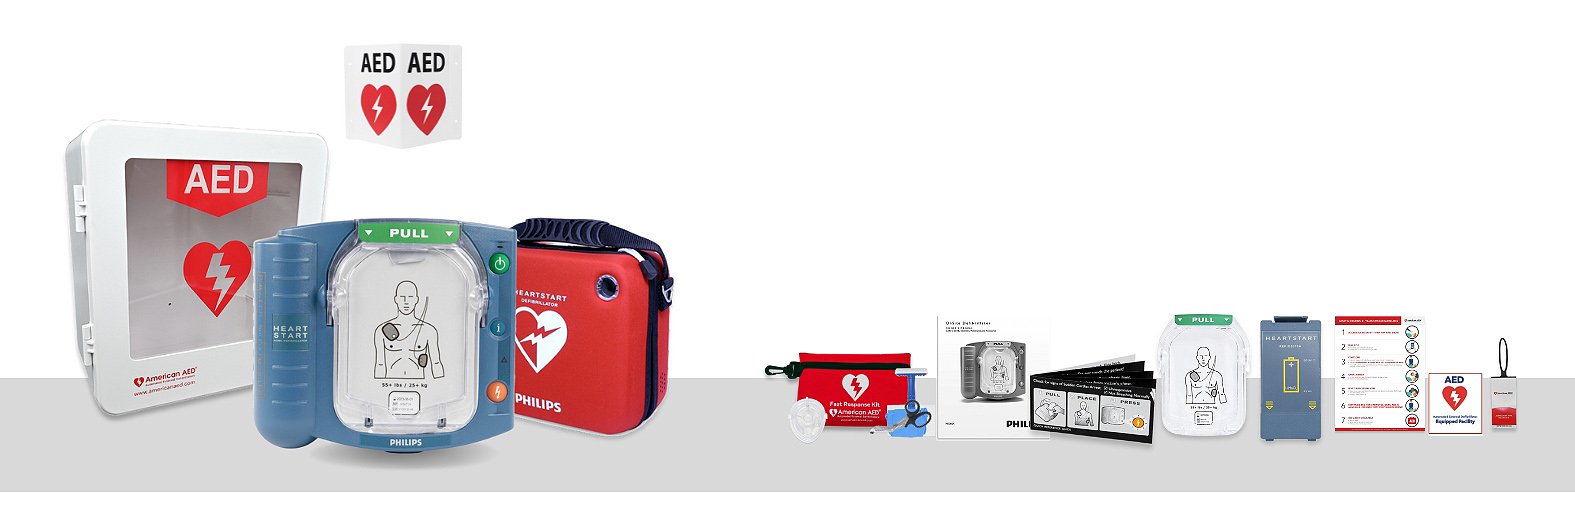 American AED Defibrillator Package for Churches & Community